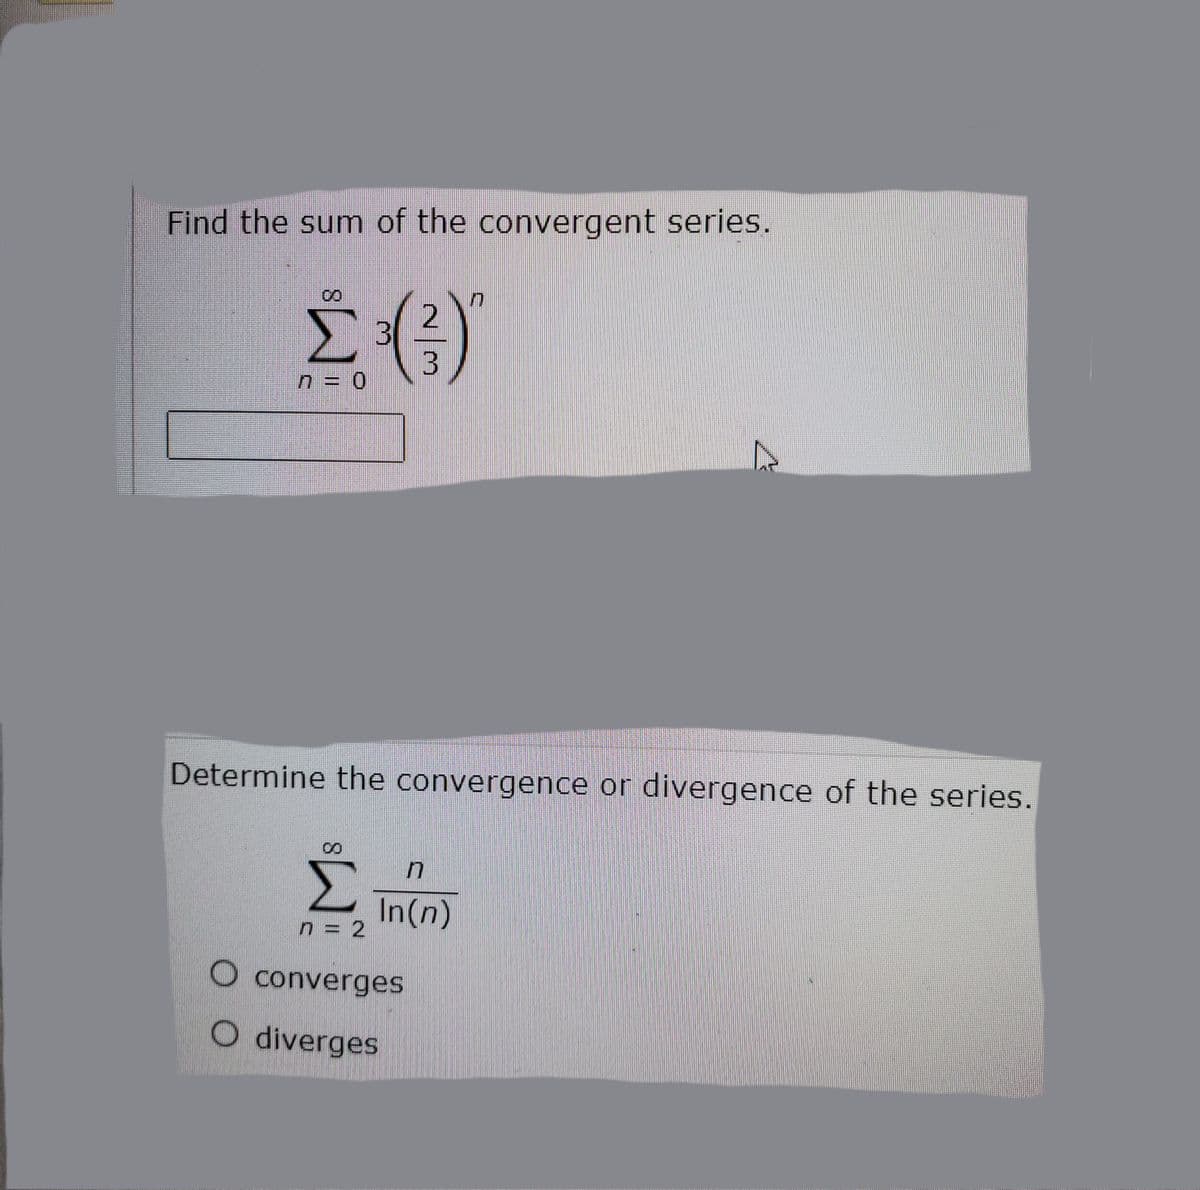 Find the sum of the convergent series.
3
n = 0
Determine the convergence or divergence of the series.
8.
Σ
In(n)
n = 2
O converges
O diverges
